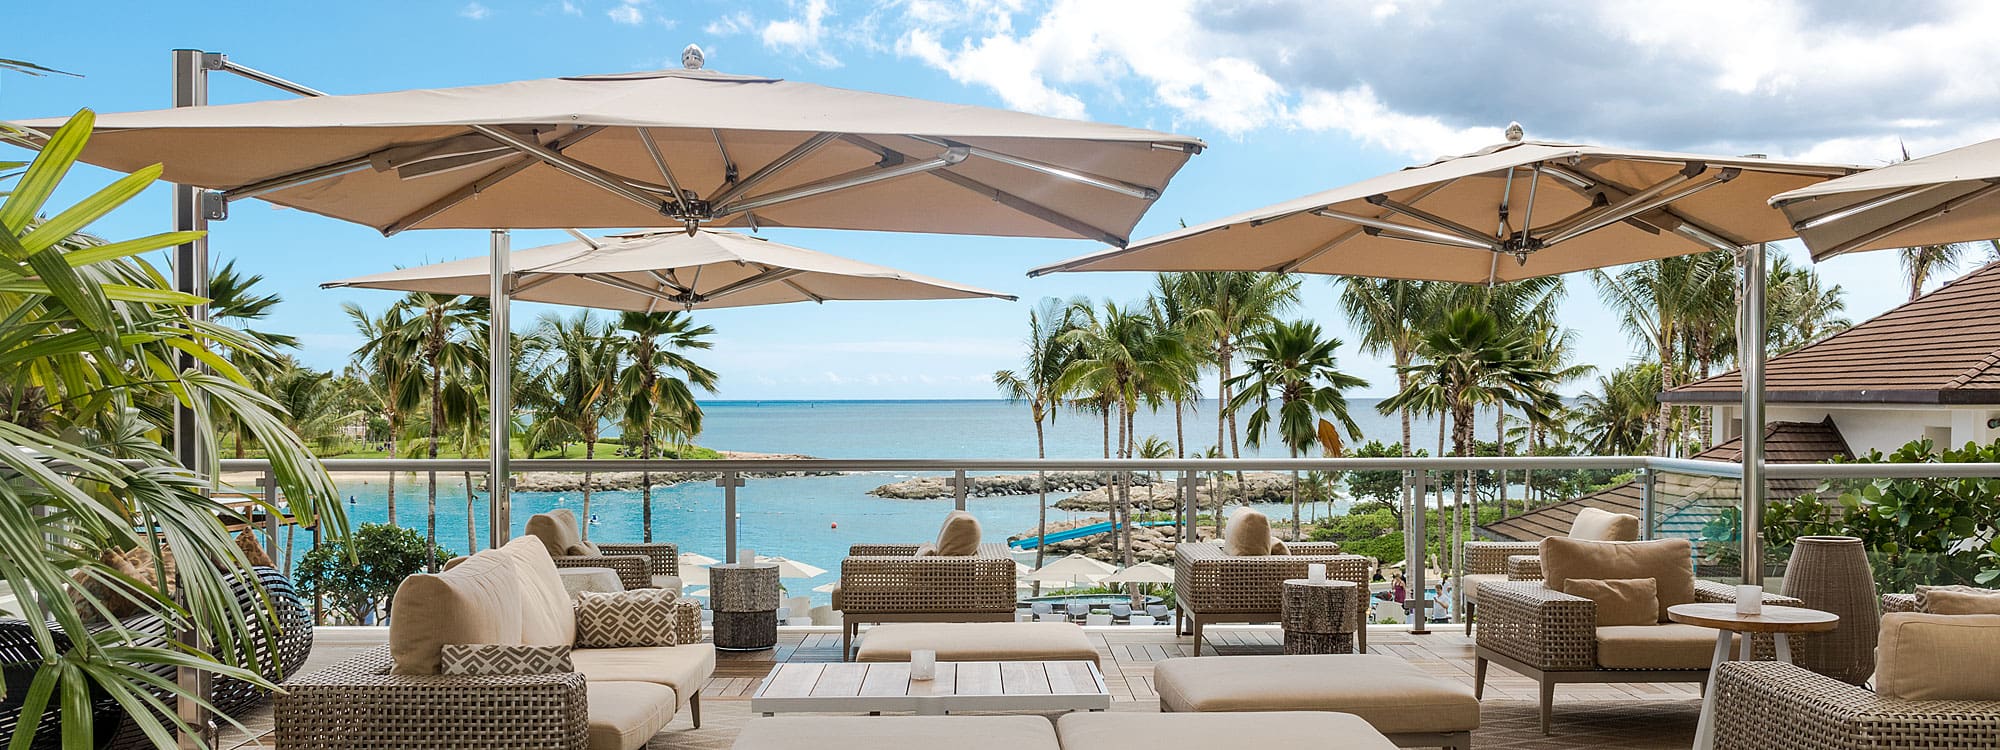 Beach Club Shot Of Tuuci Ocean Master Max cantilever parasols & luxury sun shades in marine grade parasol materials are high-spec hospitality and hotel parasols